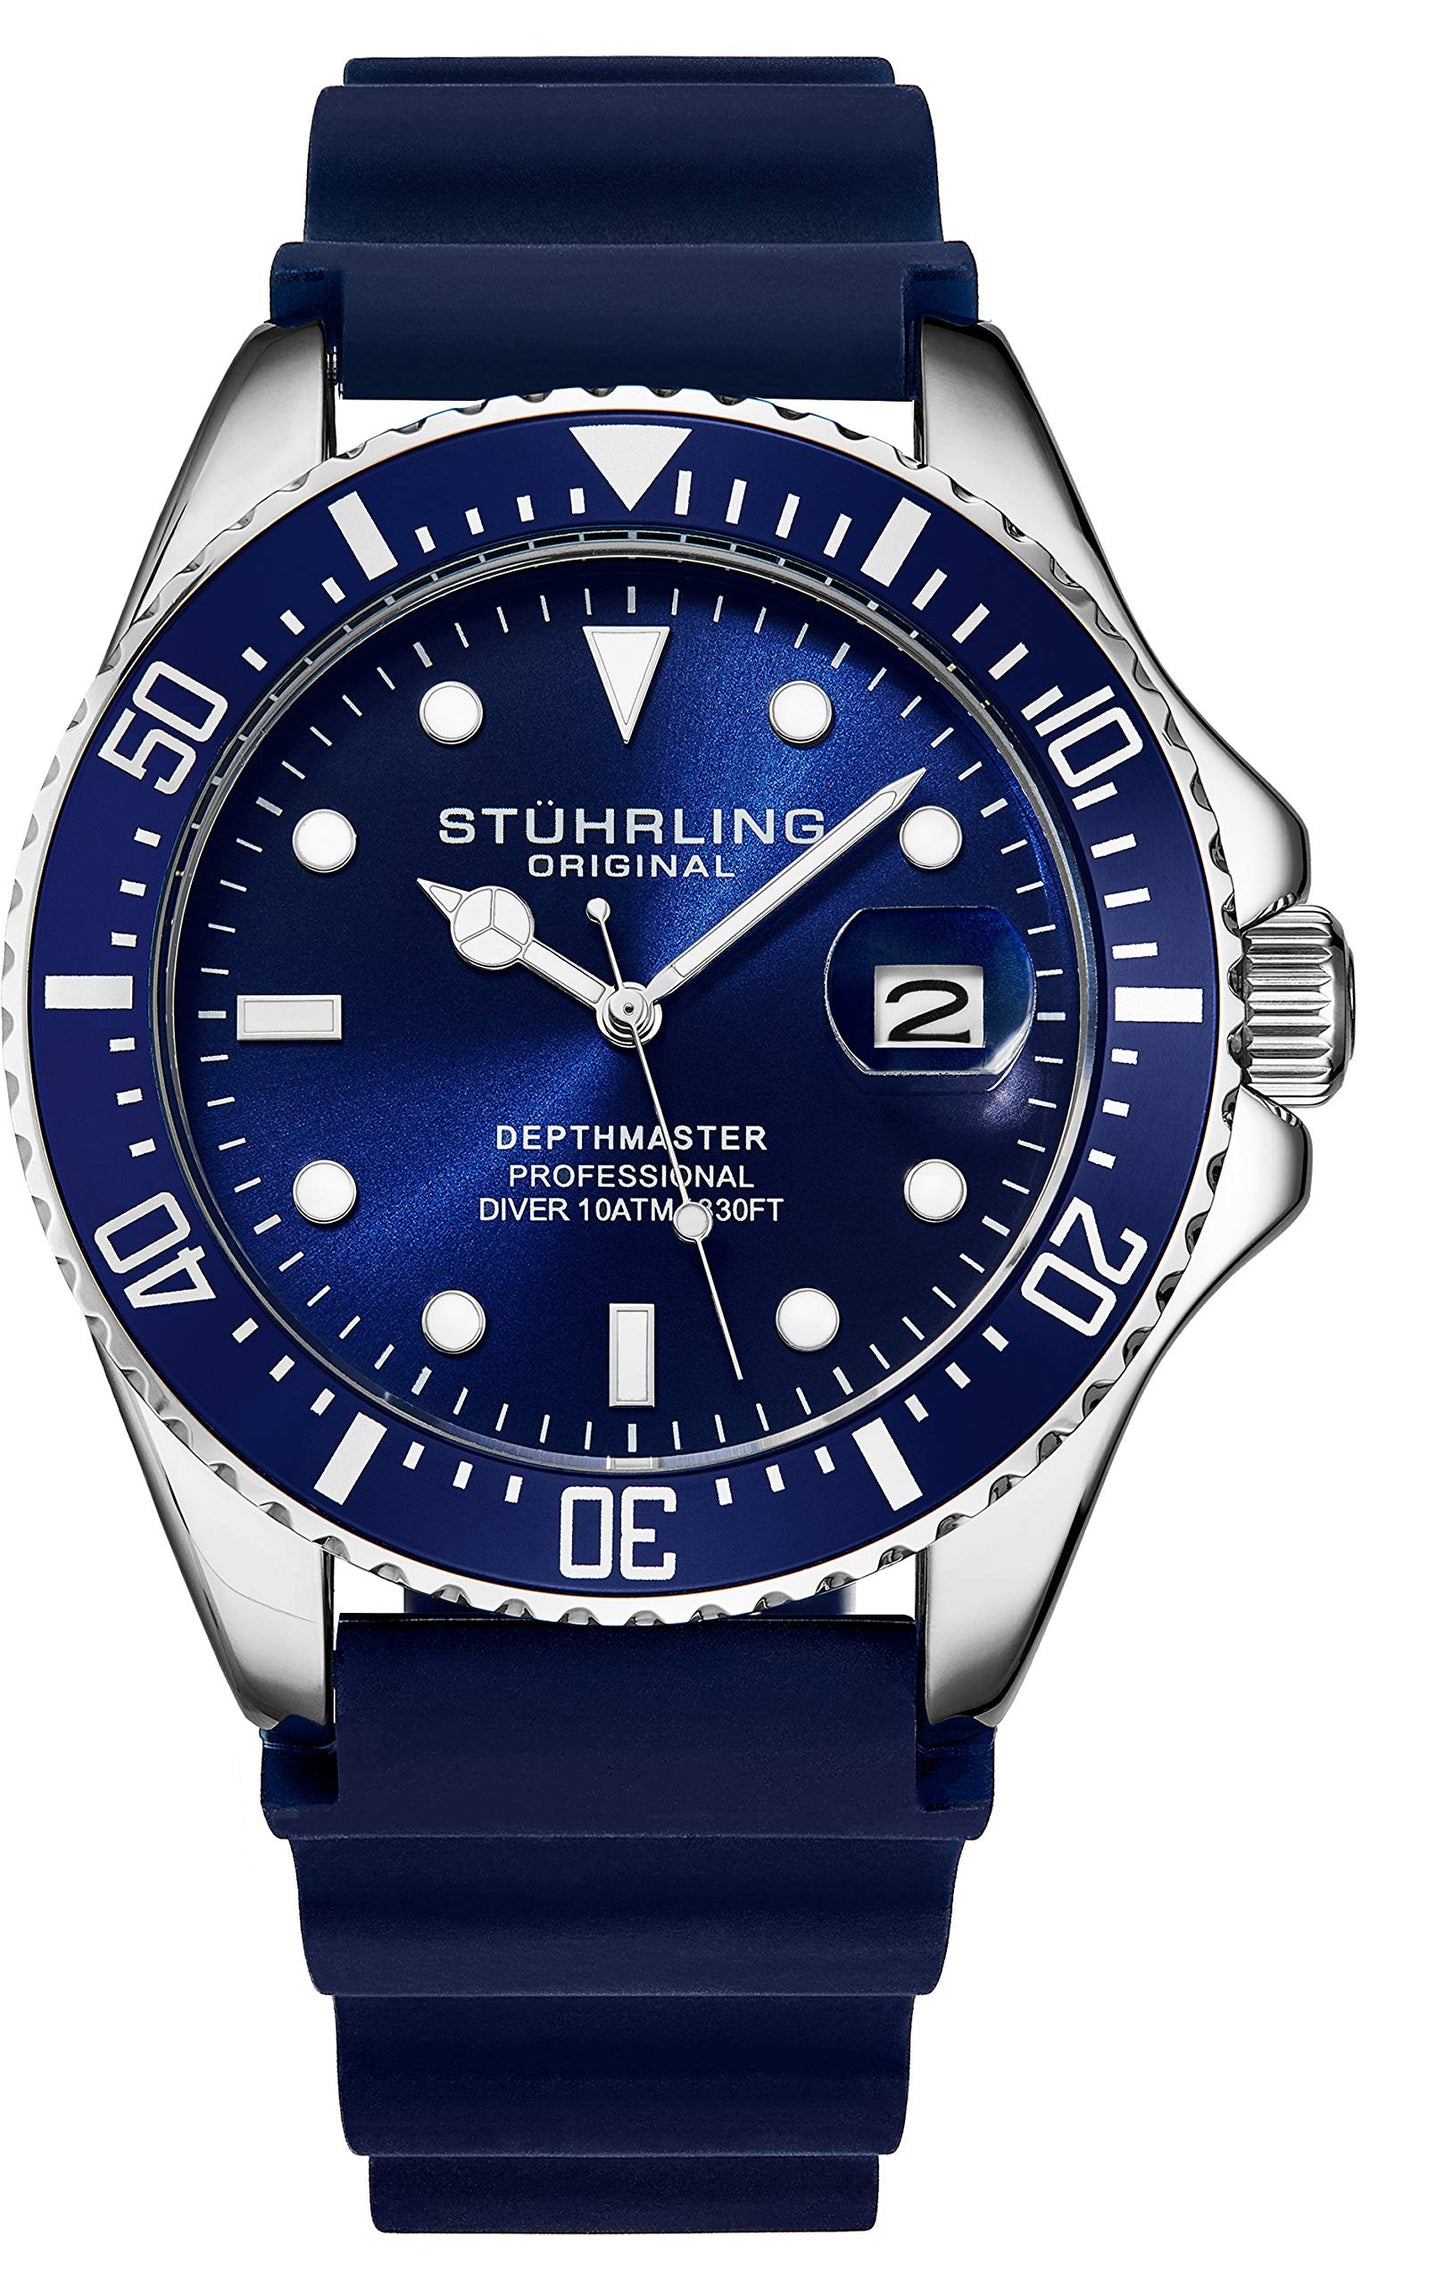 Stuhrling Original Watches for Men - Pro Diver Watch - Sports Watch for Men with Screw Down Crown for 330 Ft. of Water Resistance - Analog Dial, Quartz Movement - Mens Watches Collection (Blue)